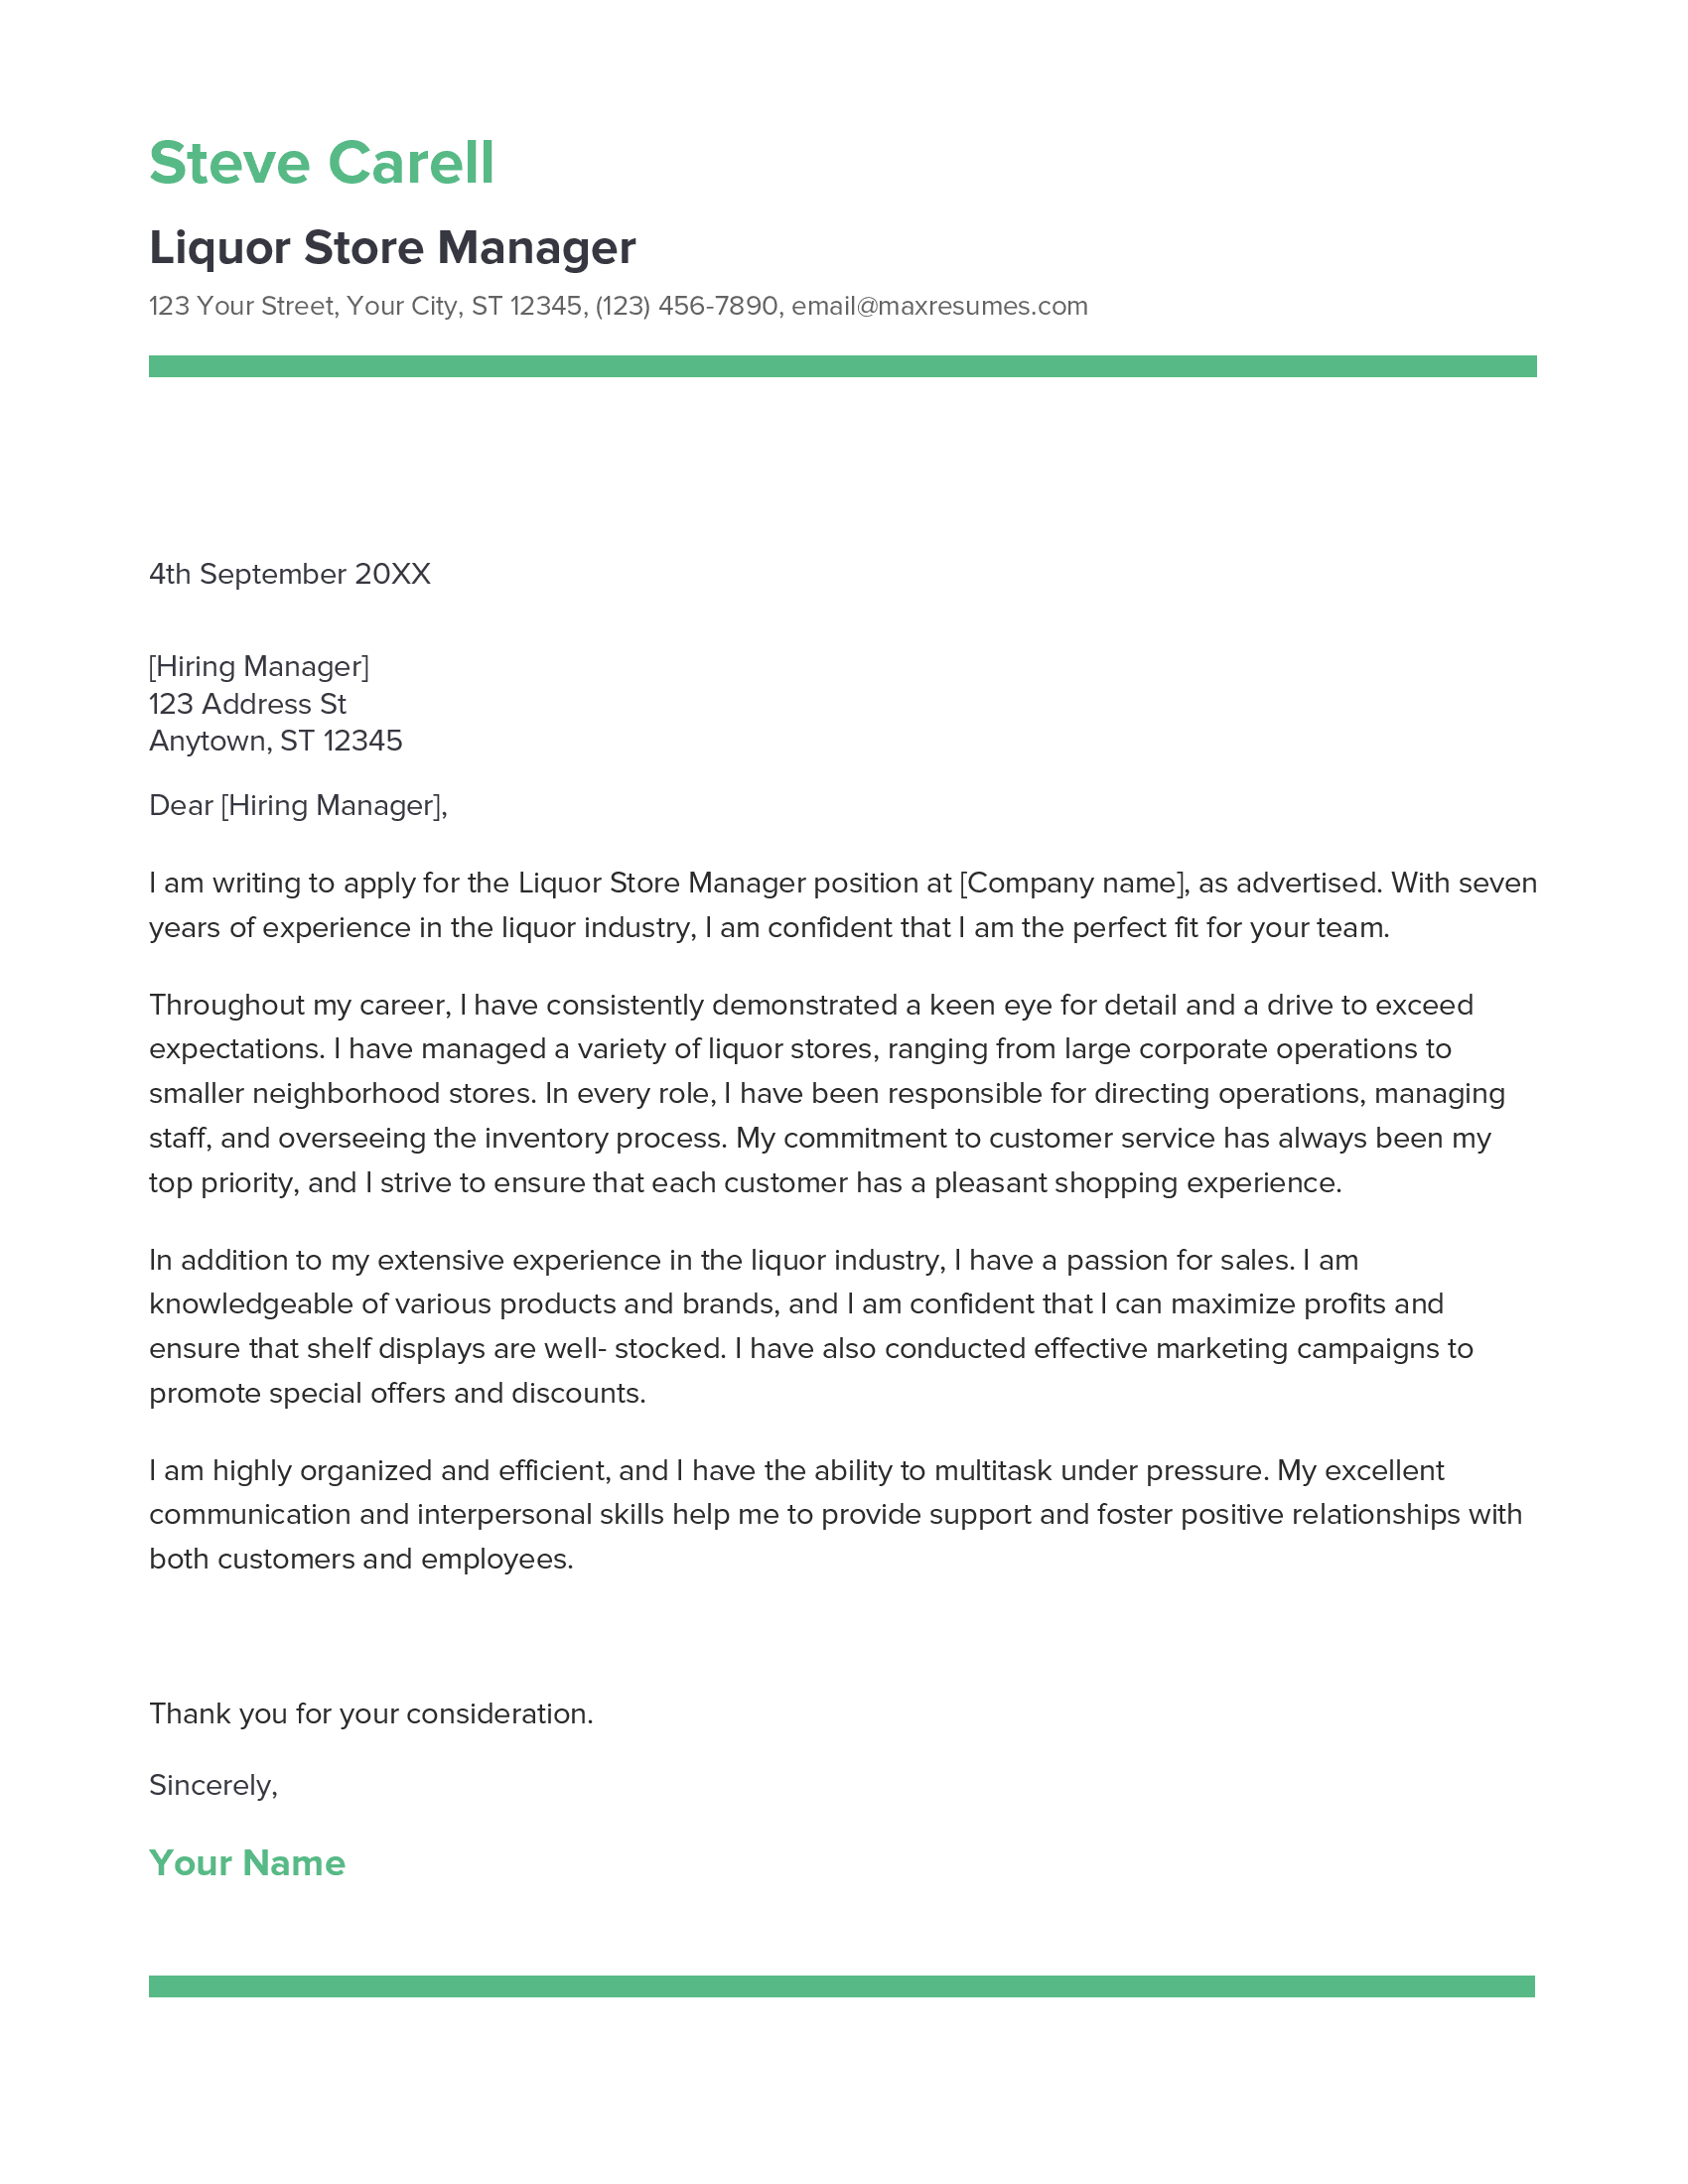 Liquor Store Manager Cover Letter Example